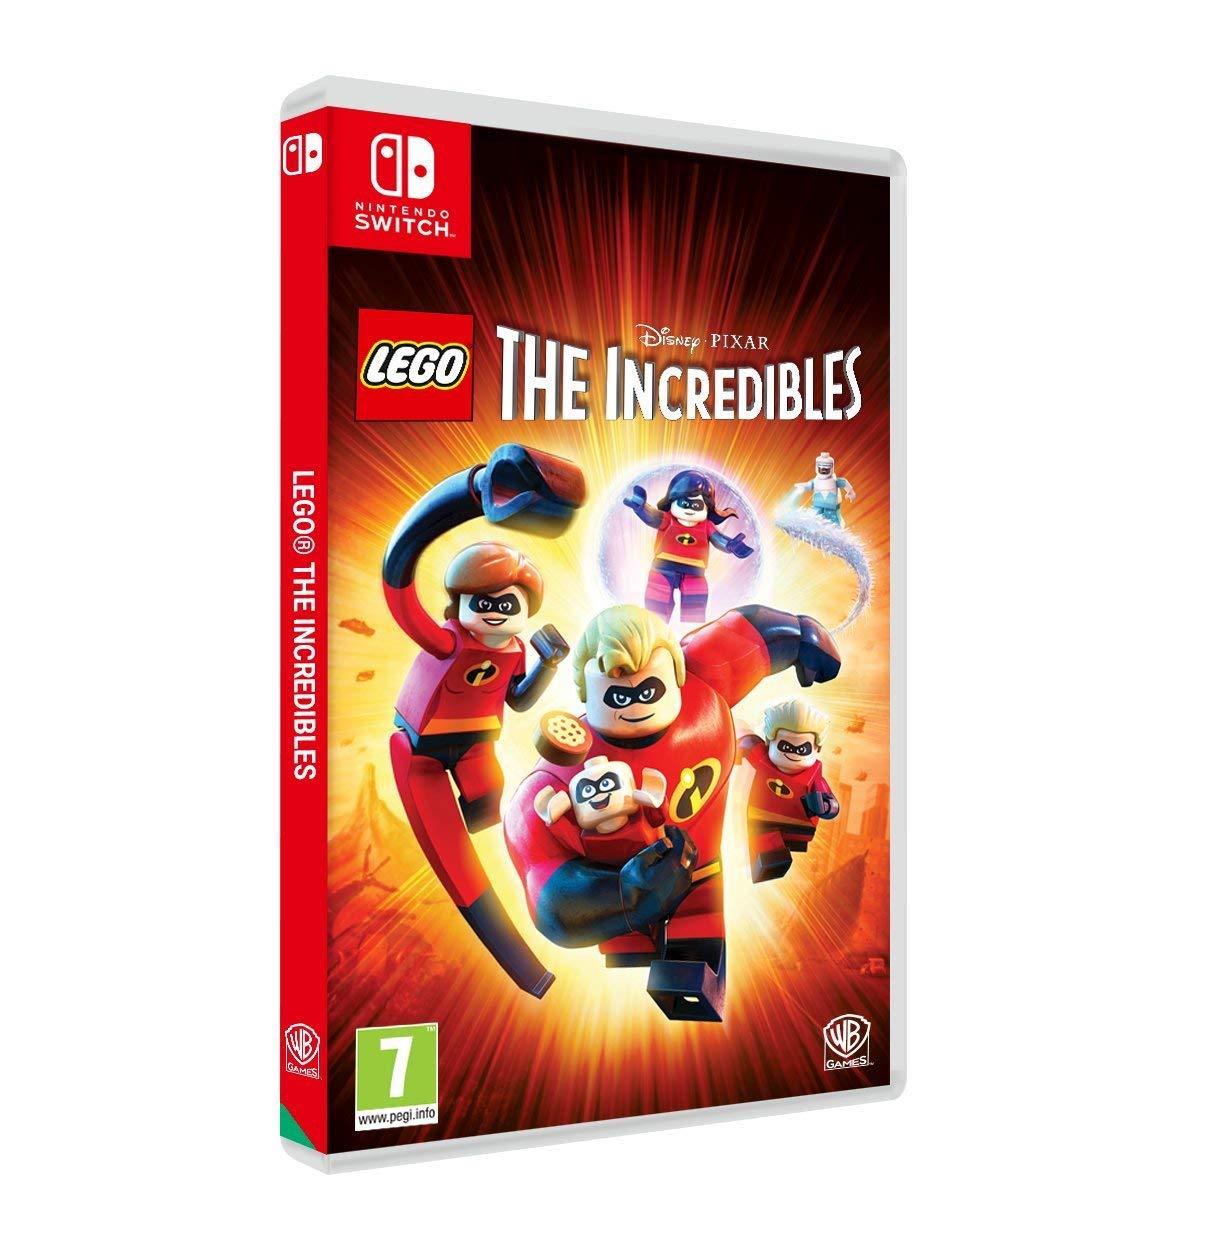 LEGO The Incredibles Video Game (Nintendo Switch)